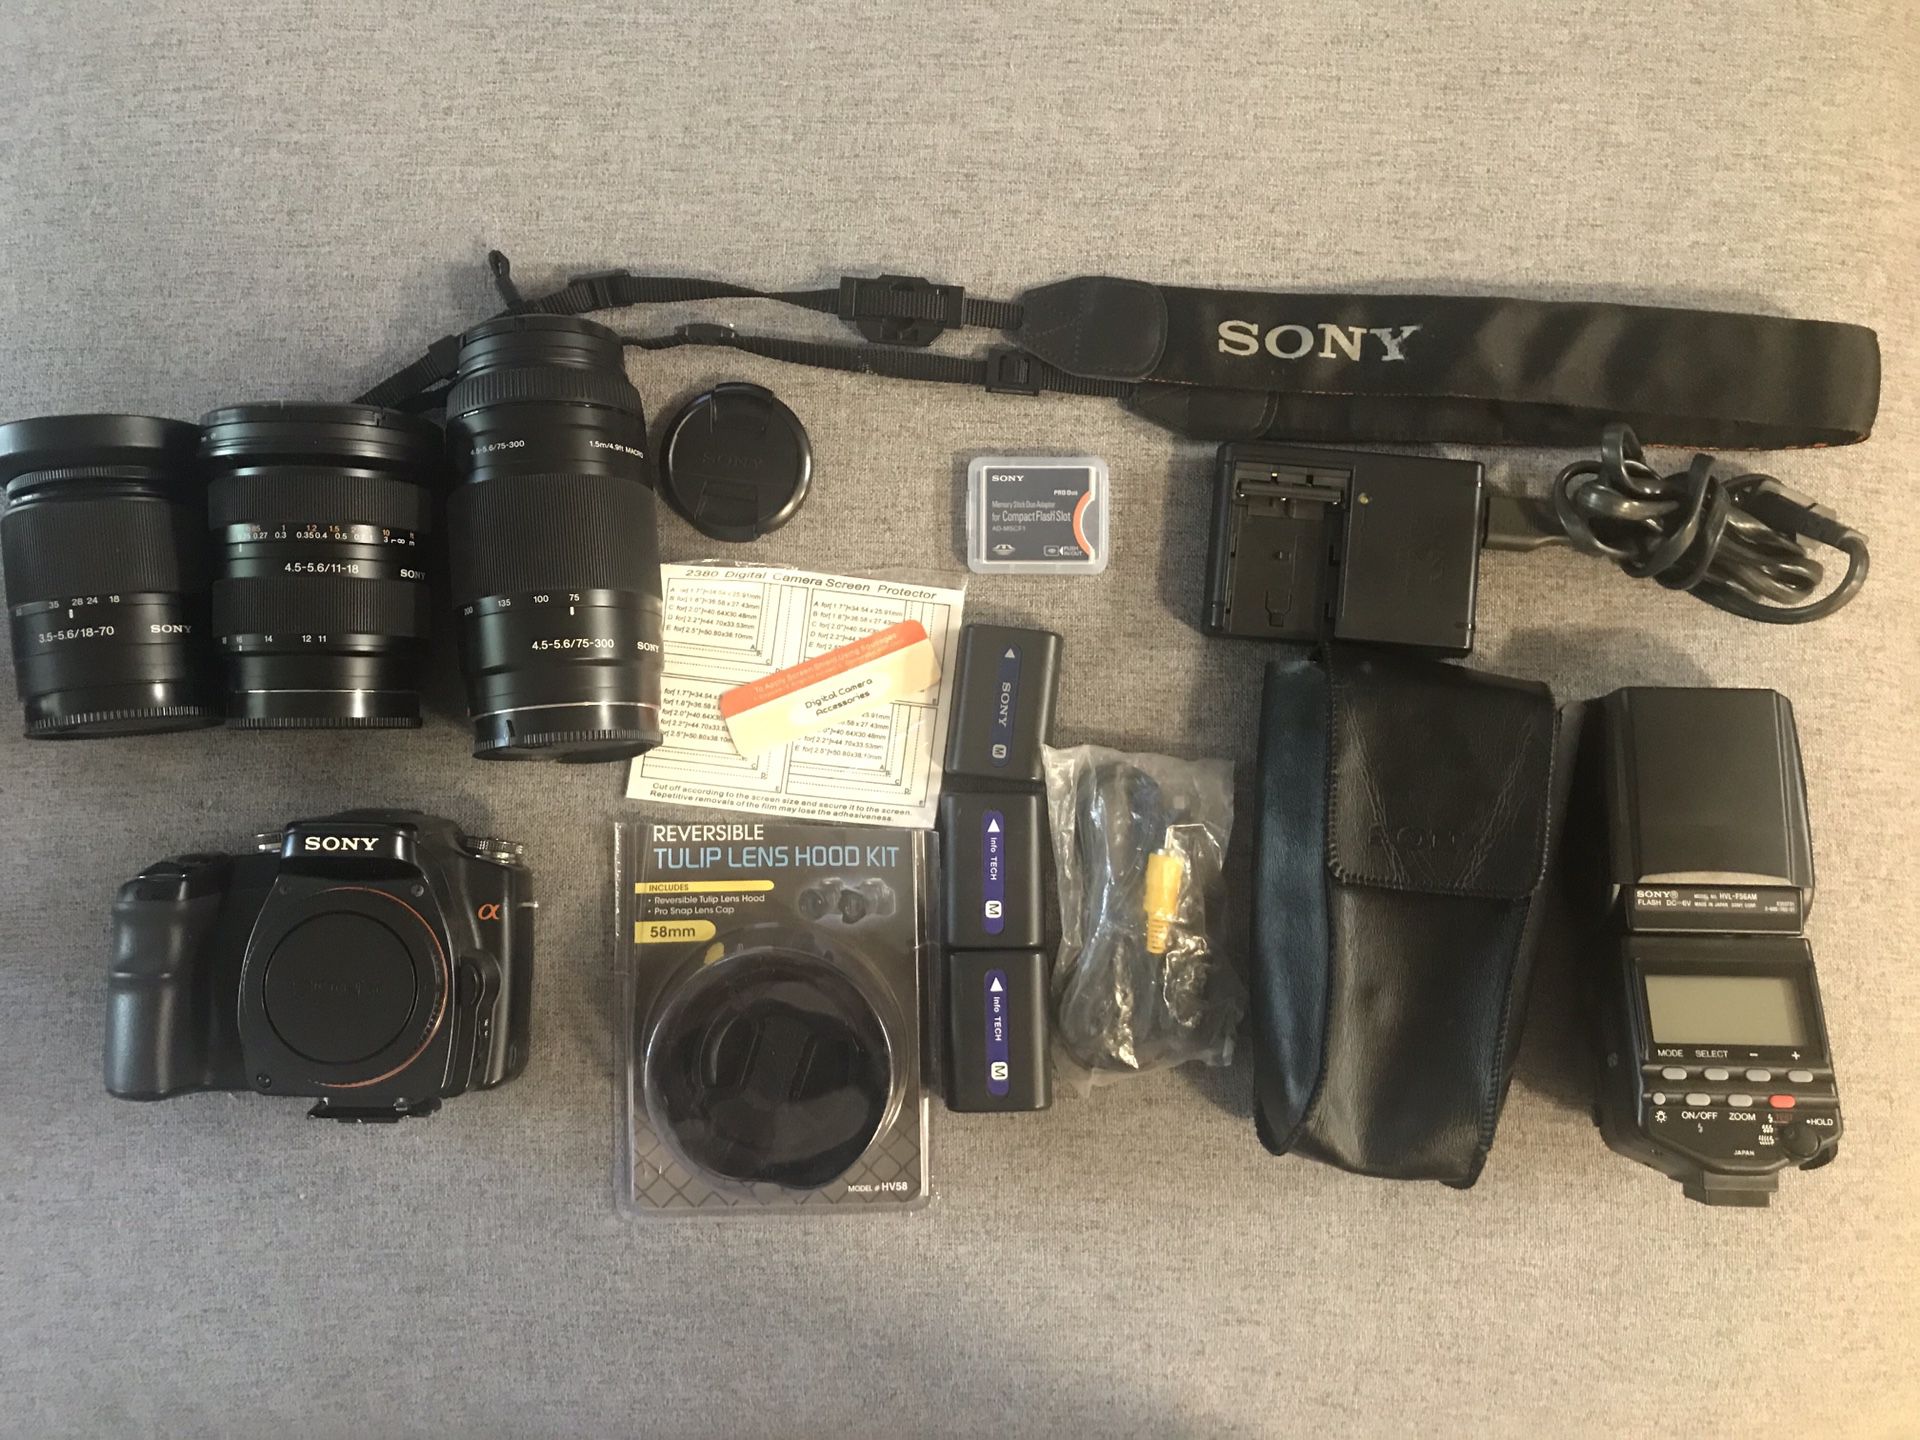 Sony camera, gear, flash, camera backpack, and 3 lens